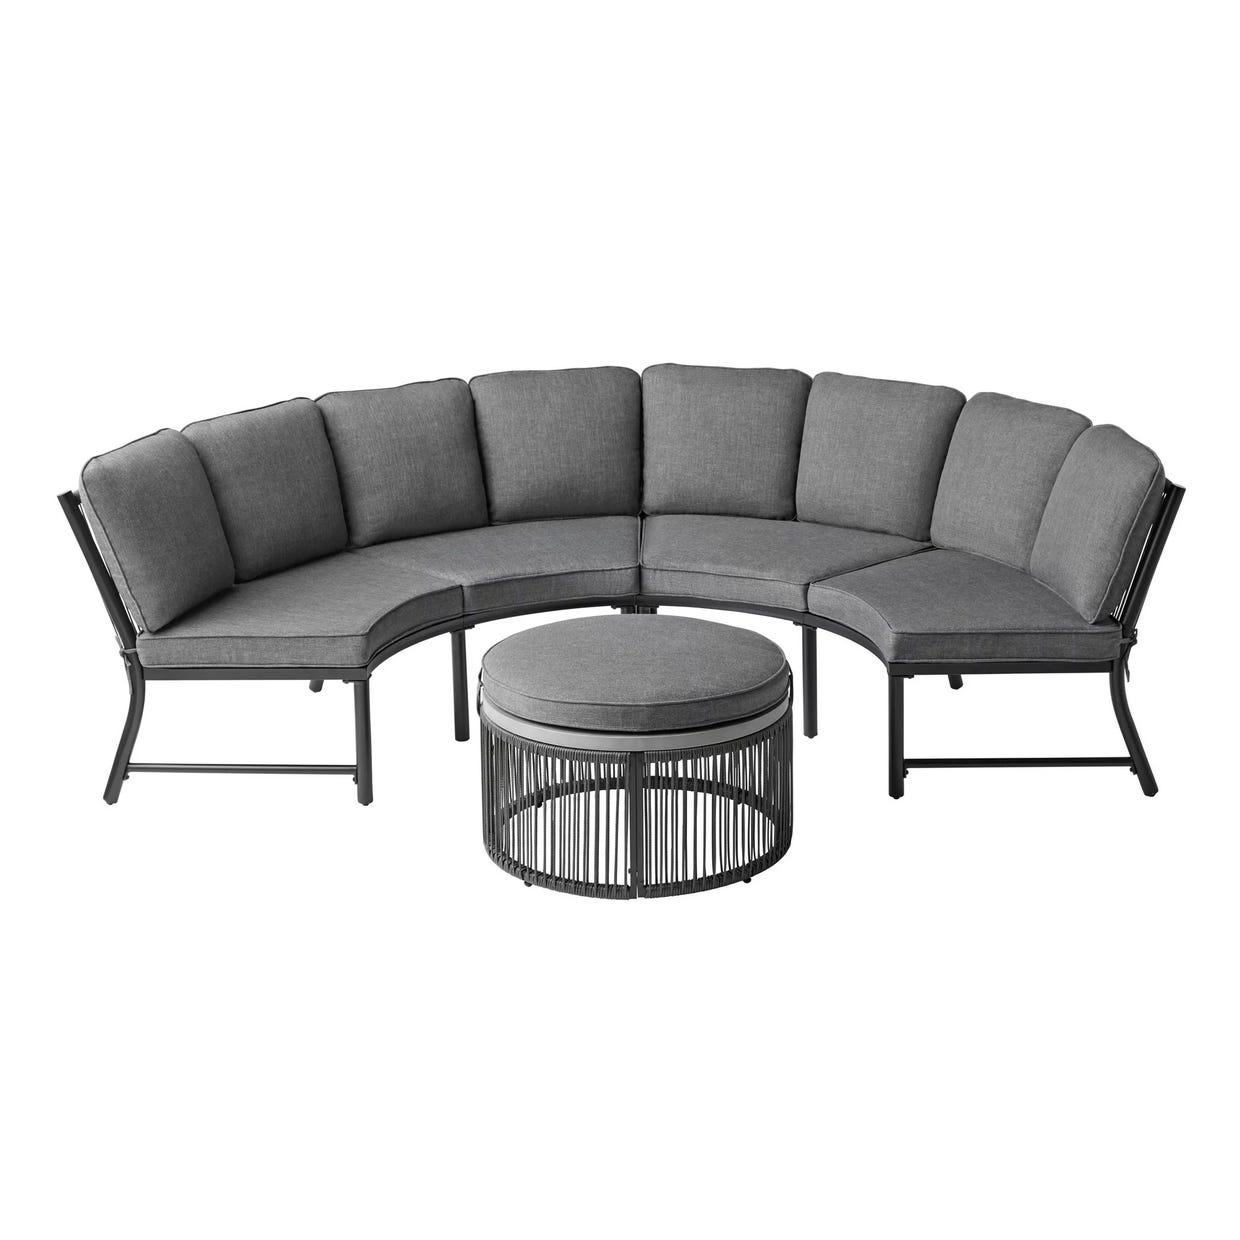 A curved, outdoor sectional sofa with gray cushions and a round, black coffee table.